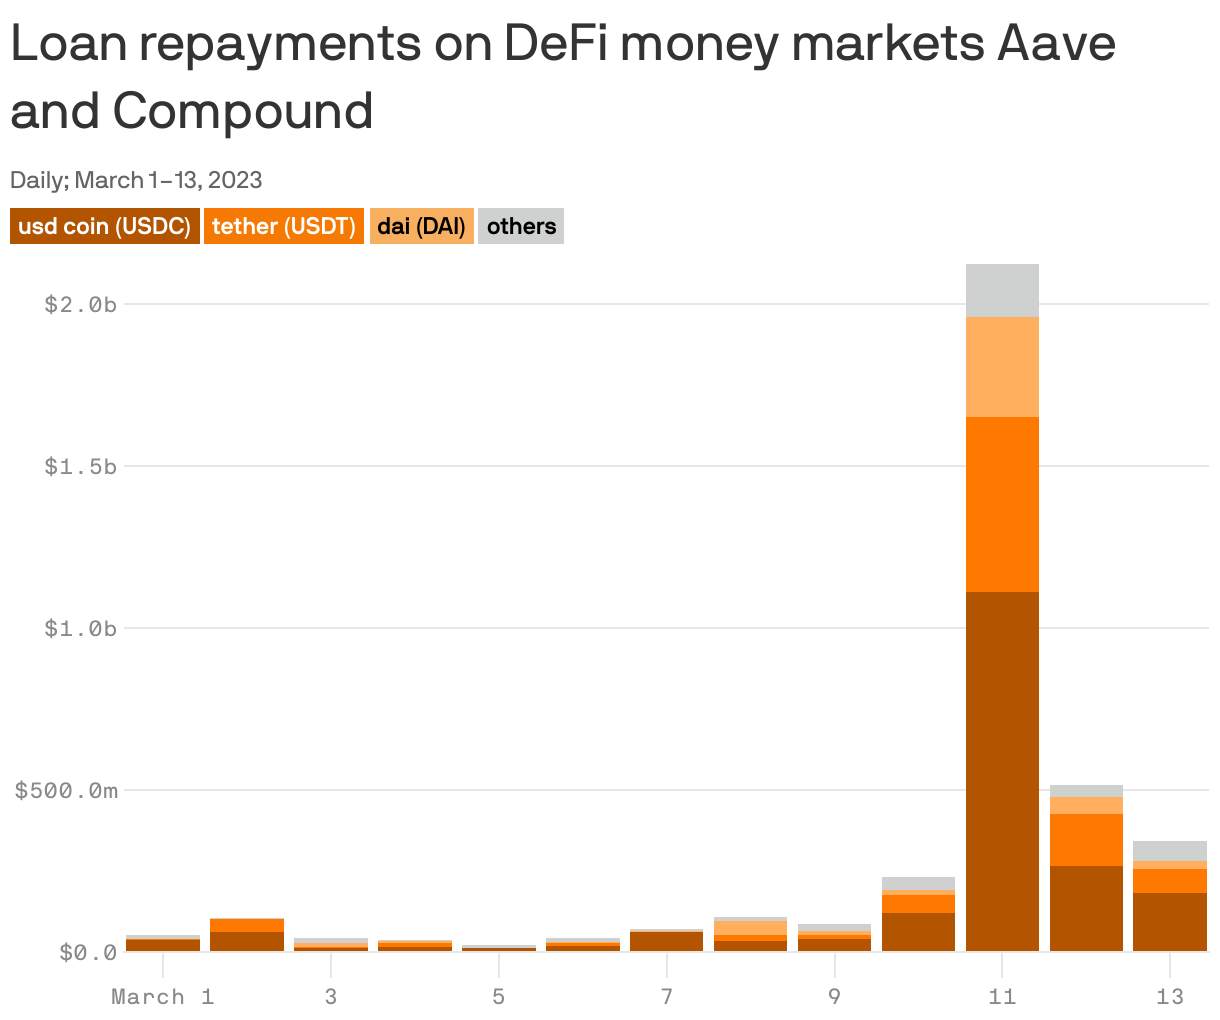 Loan repayments on DeFi money markets Aave and Compound